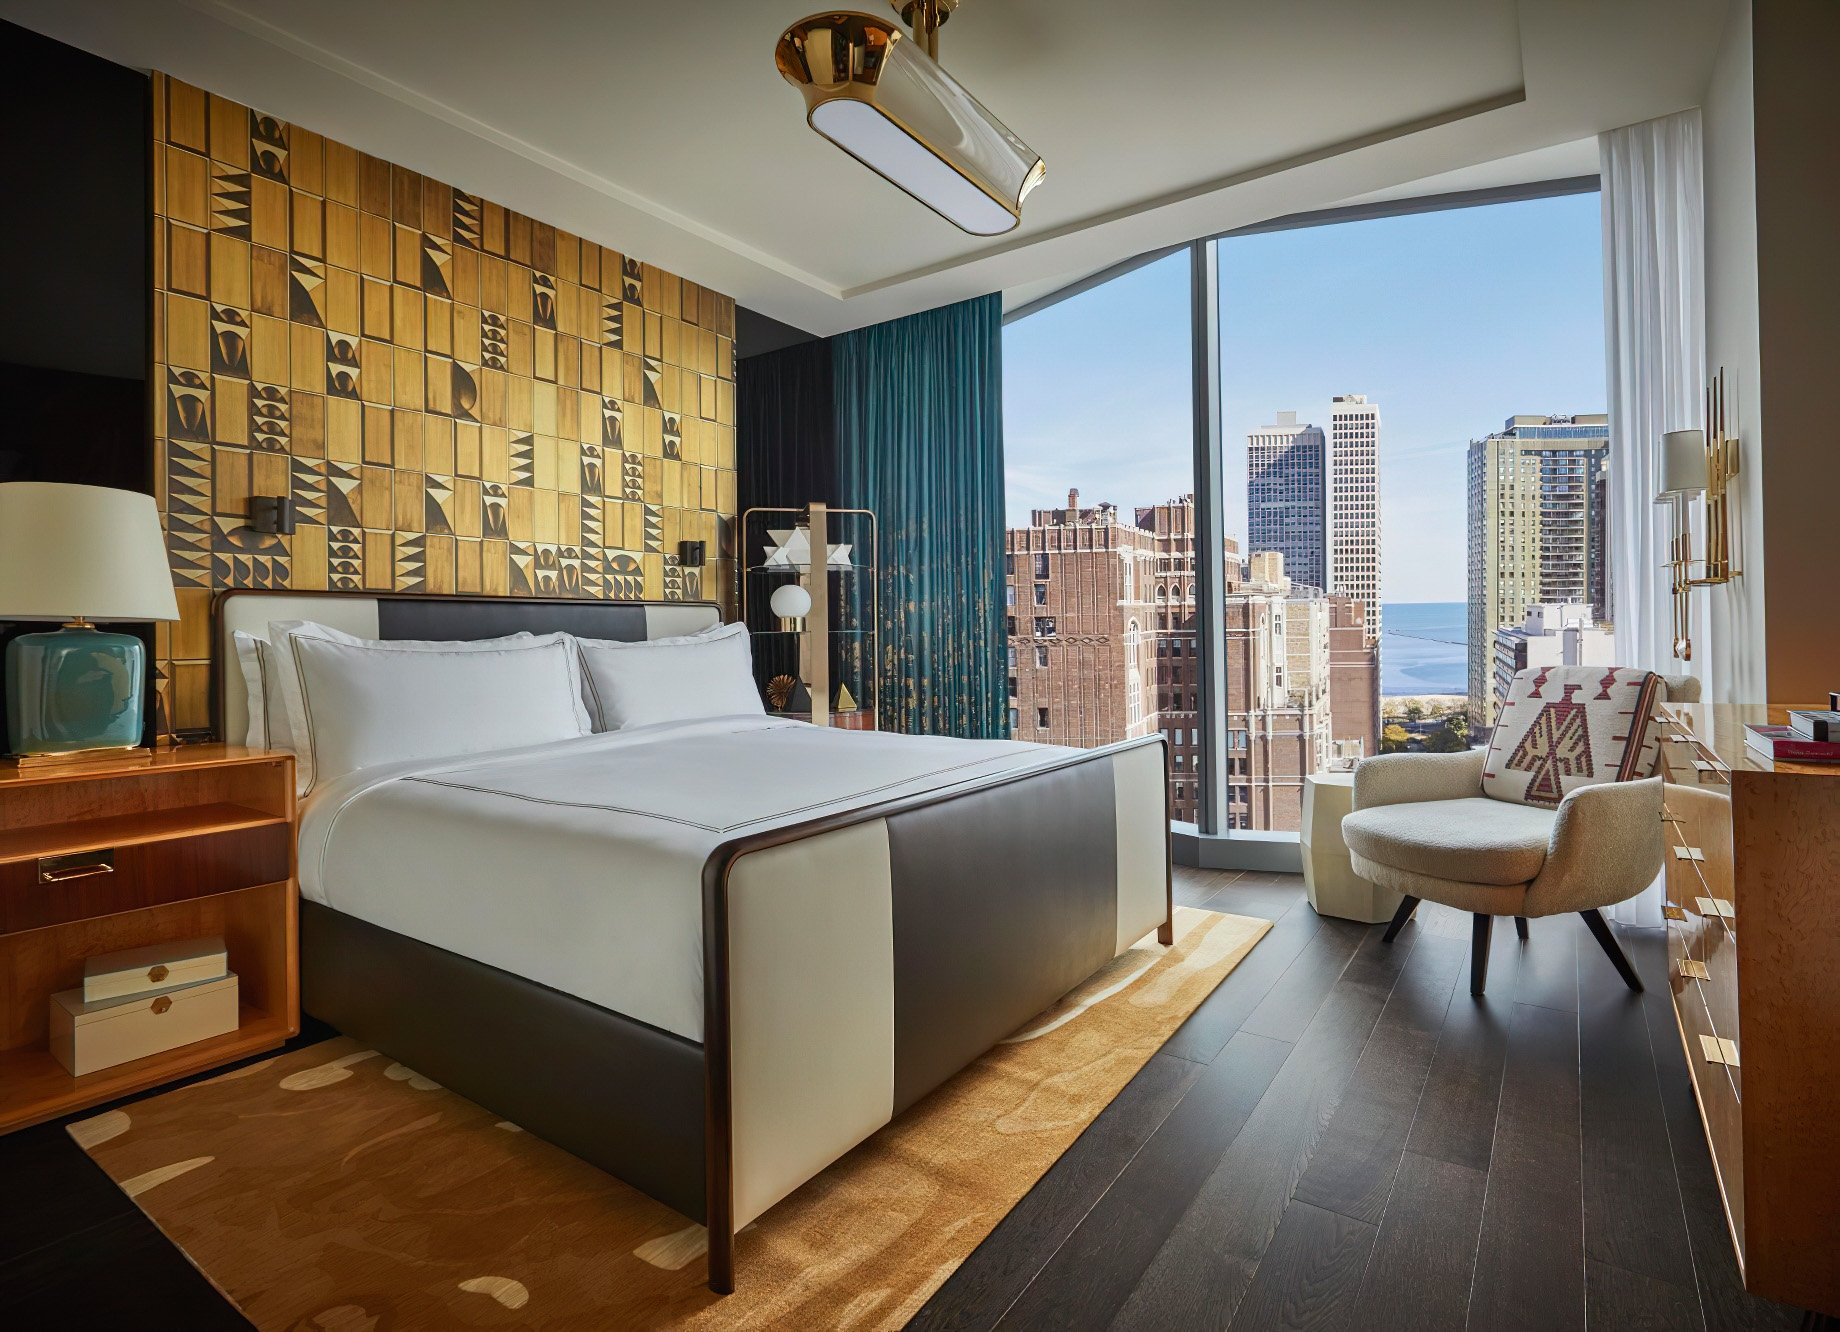 Viceroy Chicago Hotel – Chicago, IL, USA – Penthouse Suite Bedroom